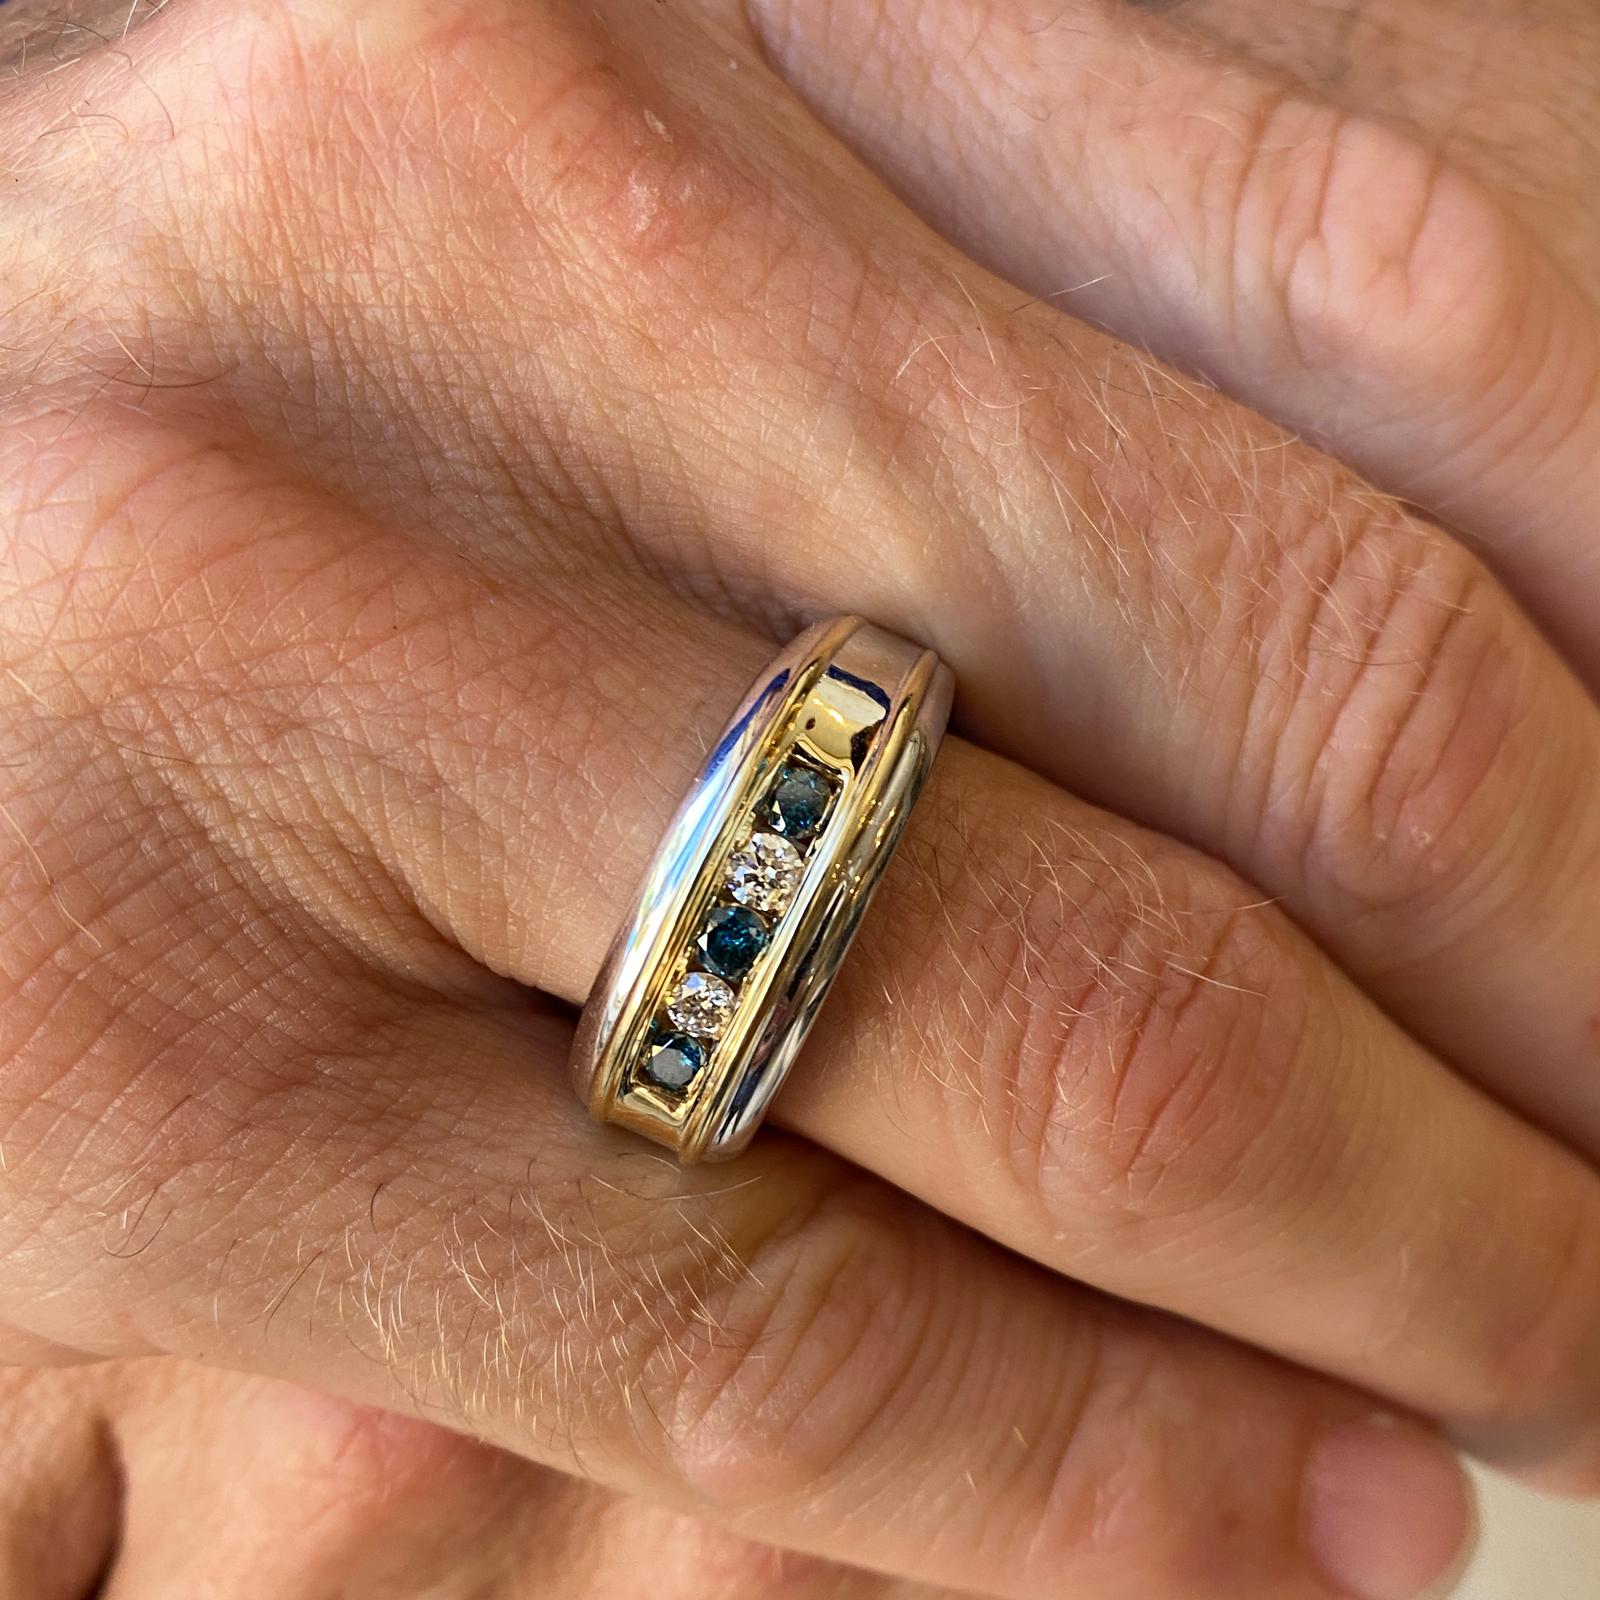 Fabulous men's blue and white diamond ring by designer Effy. The band is fashioned in 14 karat yellow and white gold. The ring features 5 alternating white and blue (assumed to be treated) round brilliant cut diamonds weighing .50 carat total